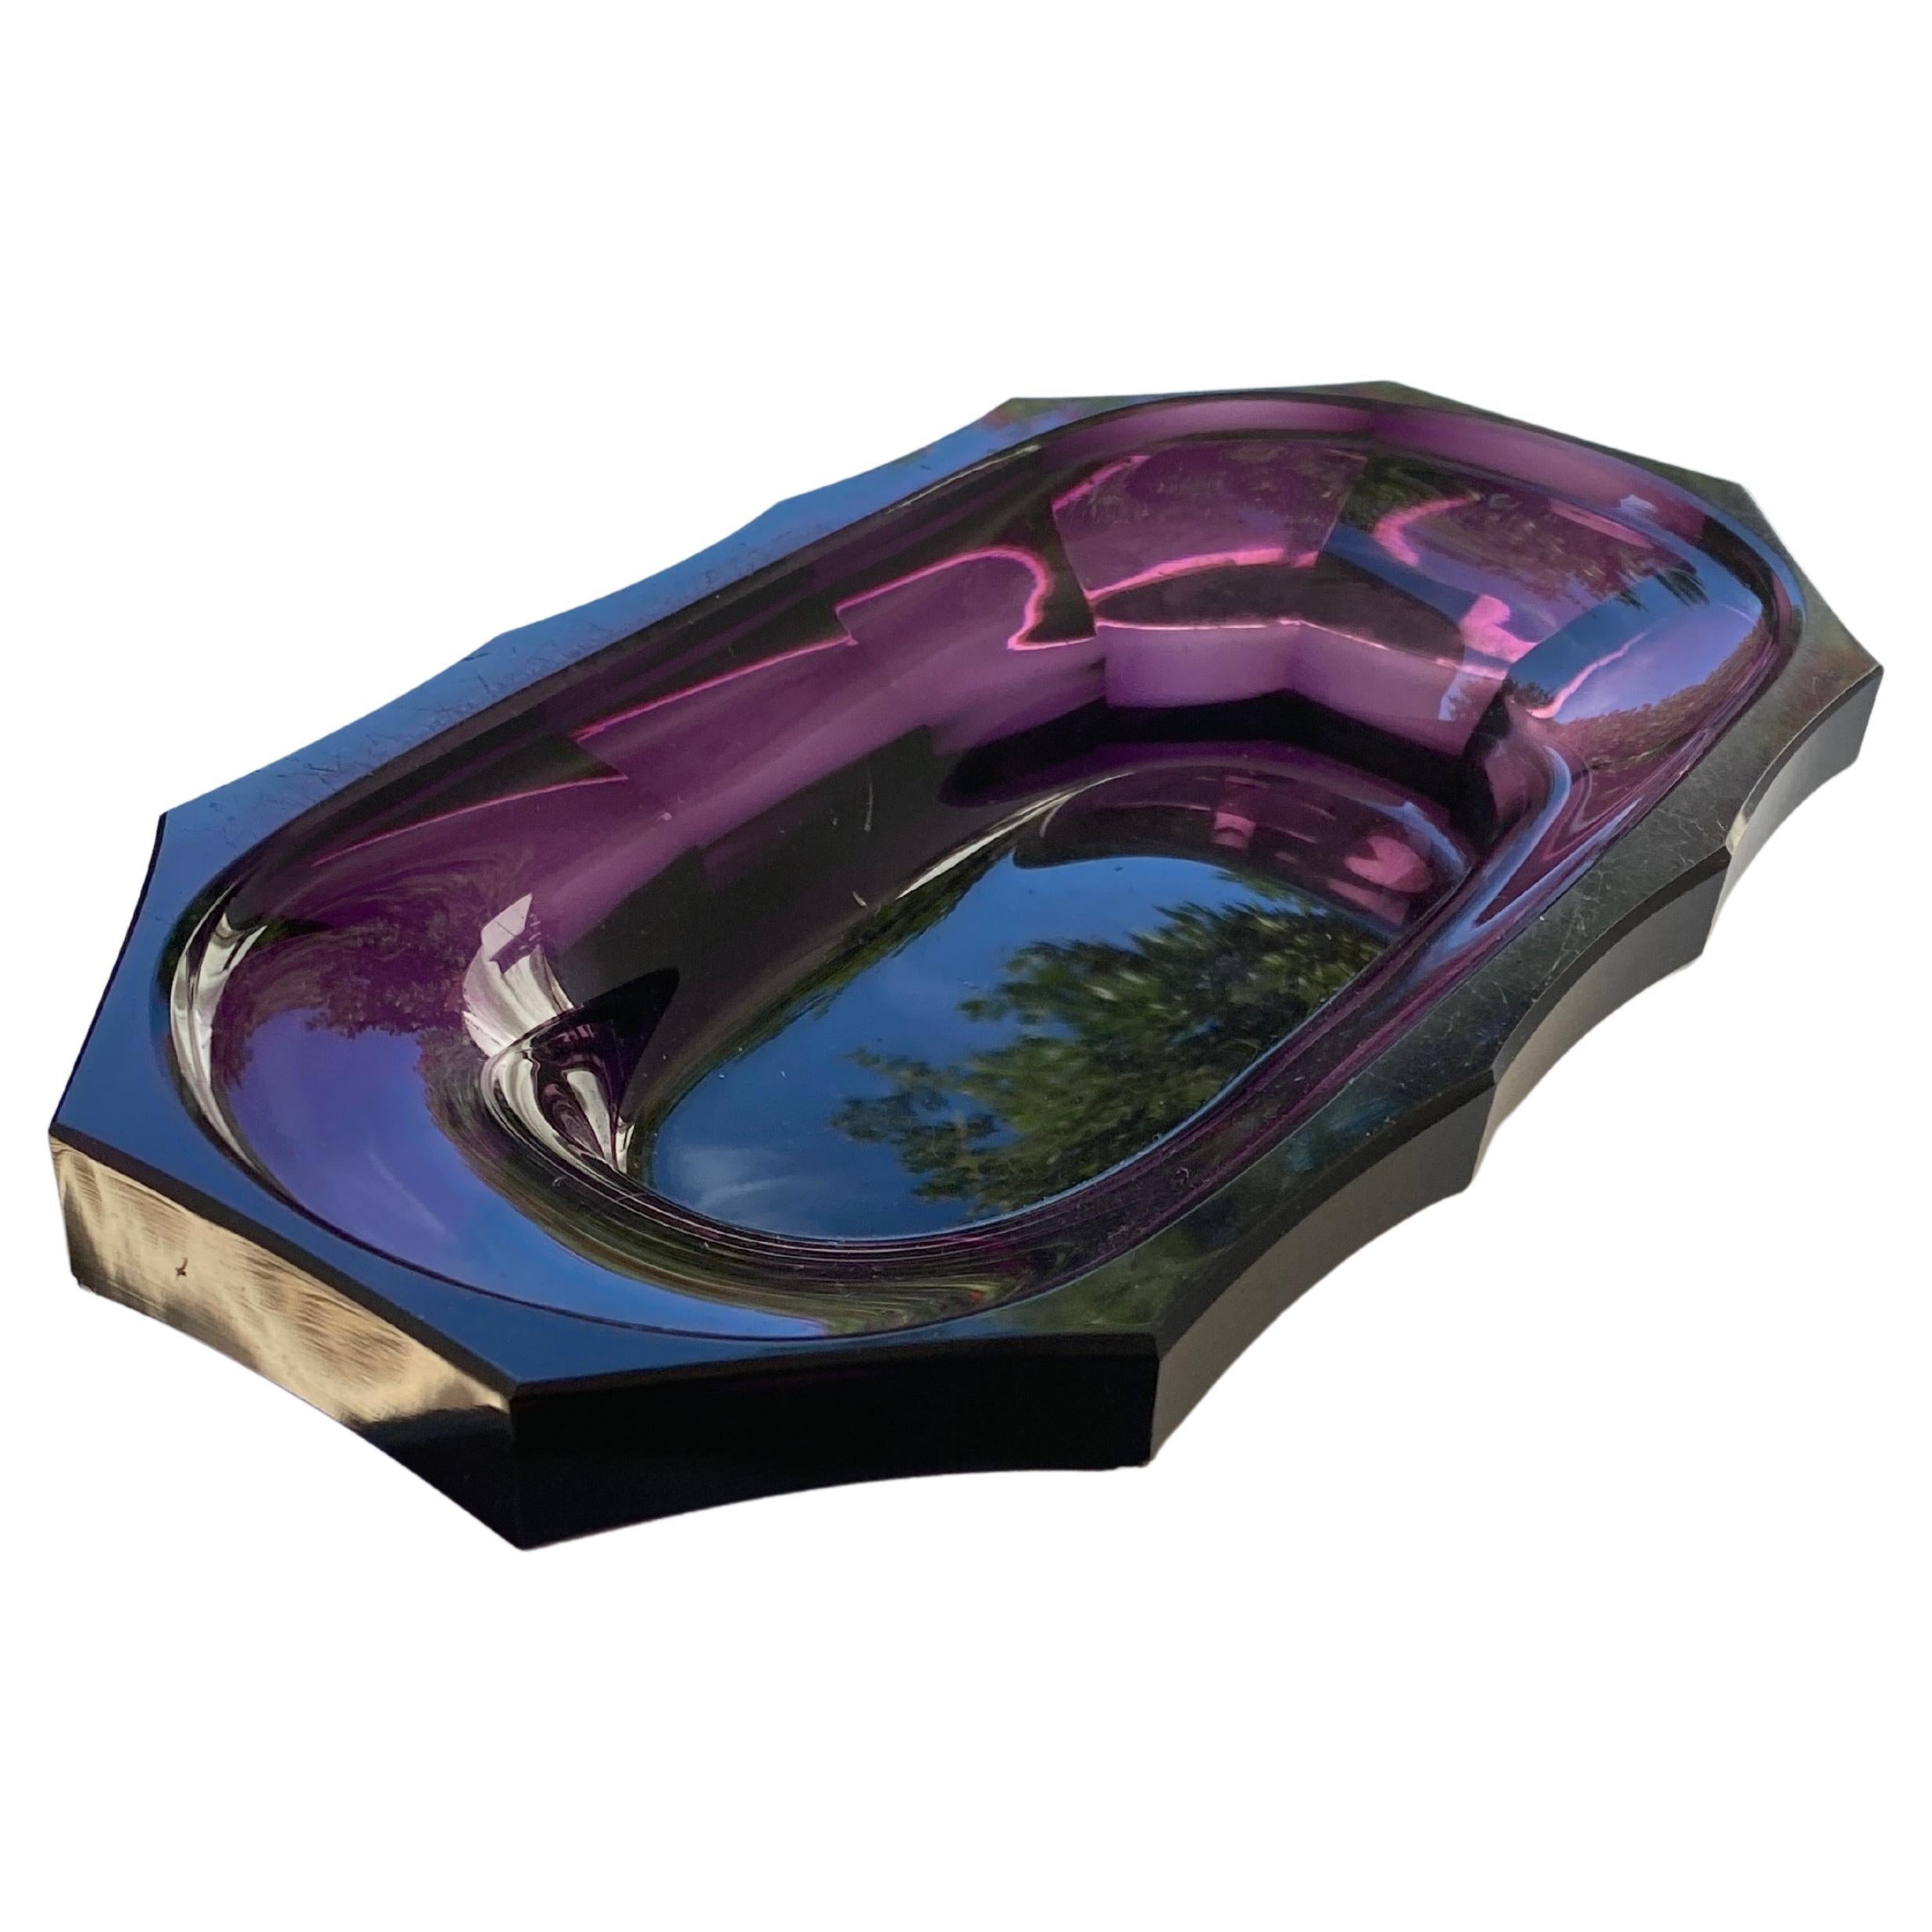 Art Deco Vide Poche or Ashtray, in Purple Color, in Art Glass, from France 1940 For Sale